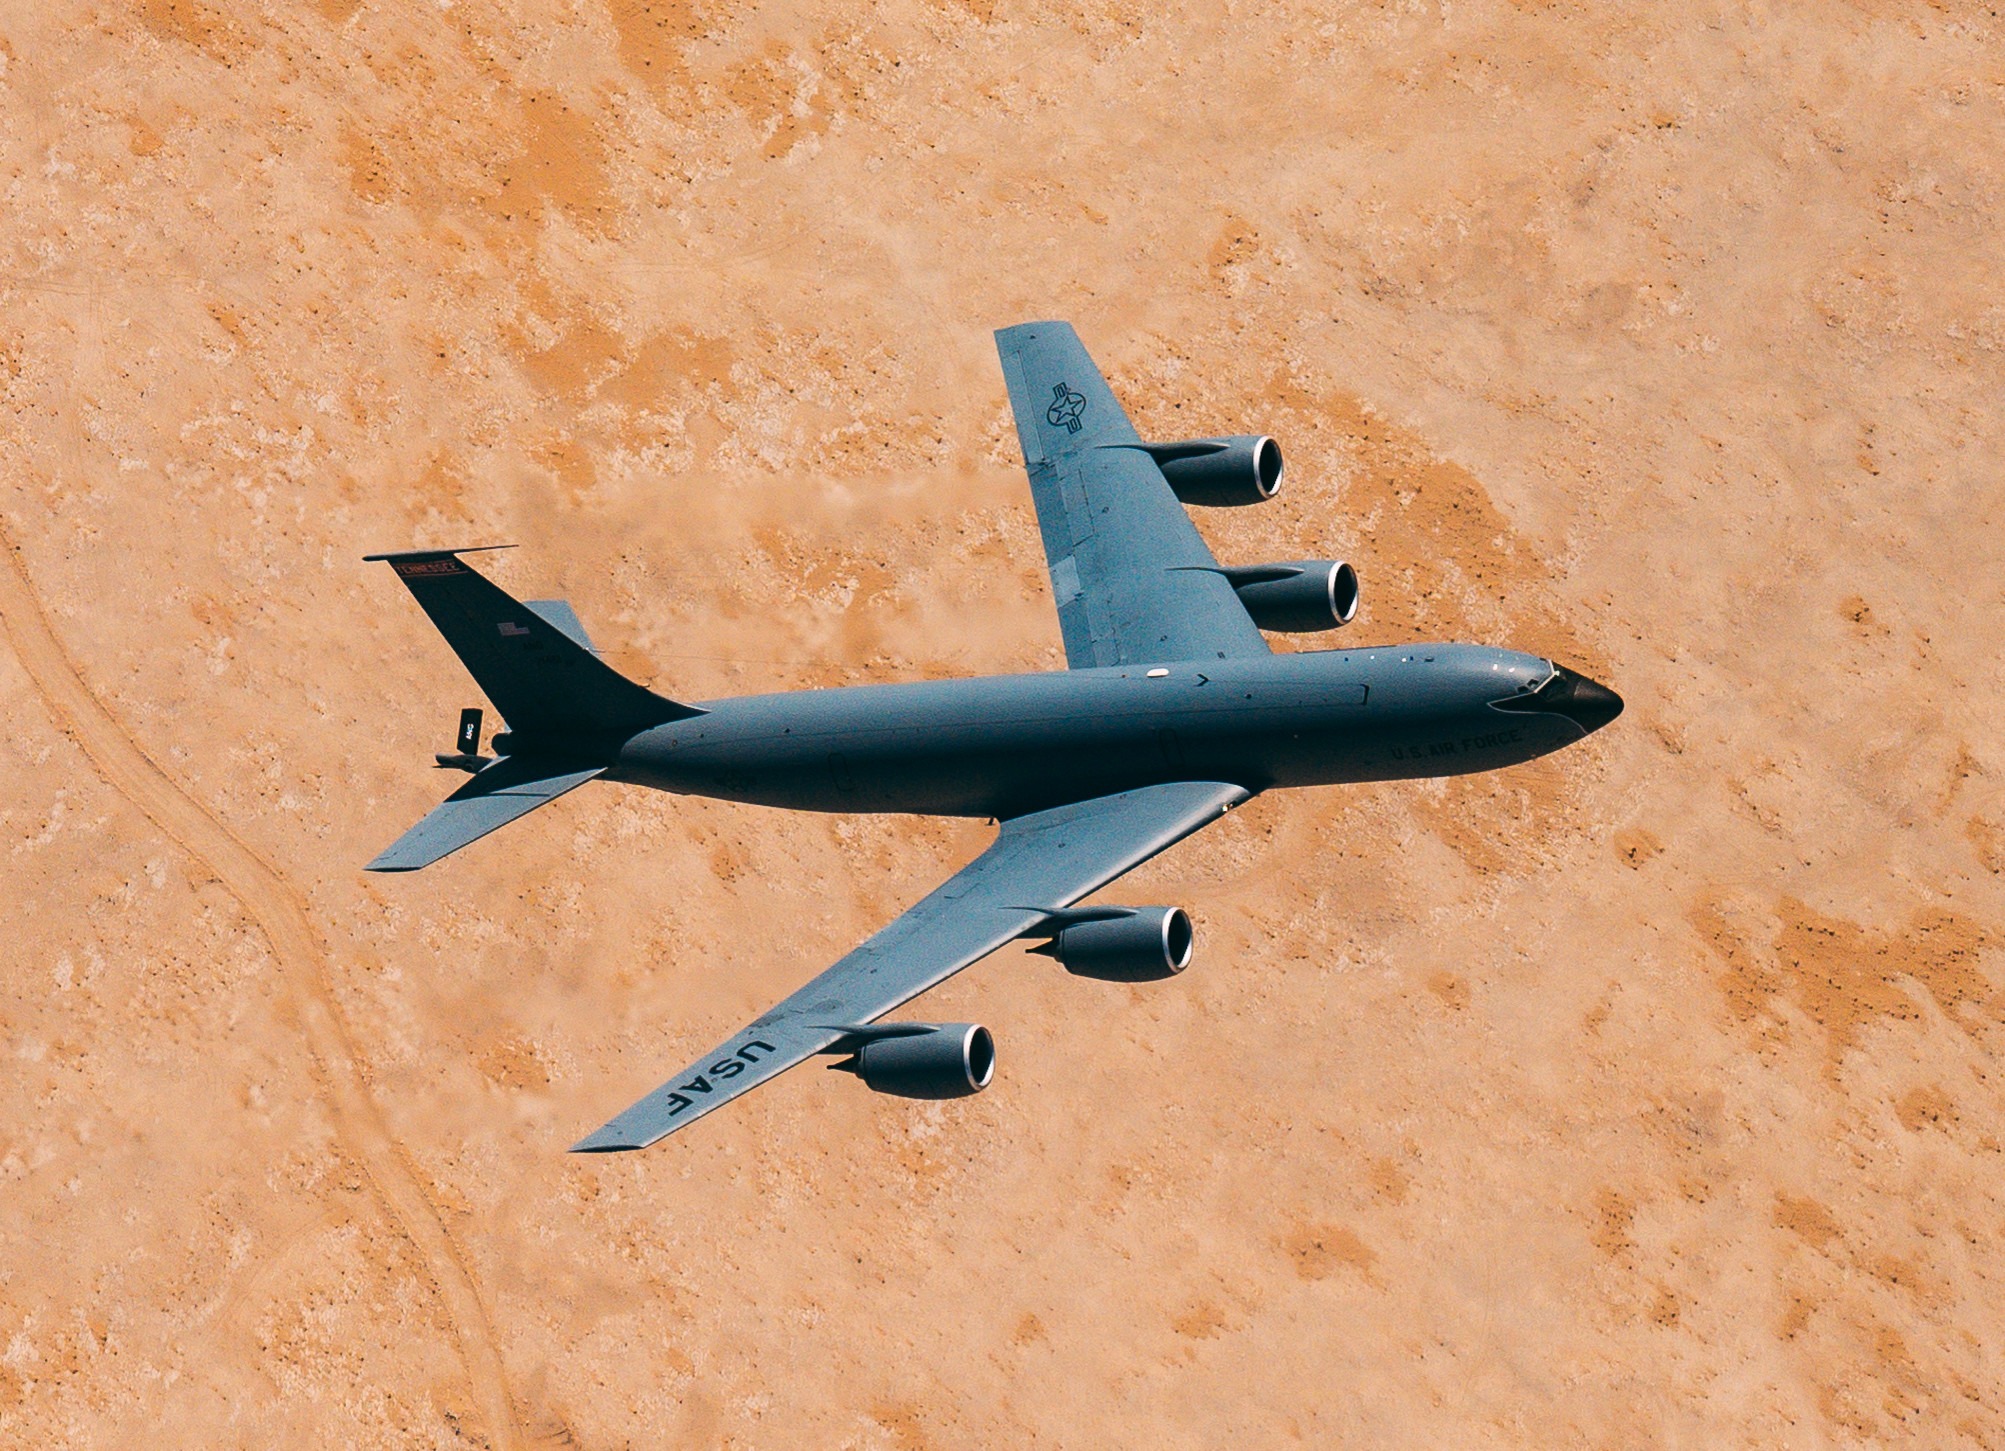 A U.S. Air Force KC-135 Stratotanker aircraft, assigned to the 350th Expeditionary Aircraft Refueling Squadron, flies over Qatar, Feb. 13, 2021.